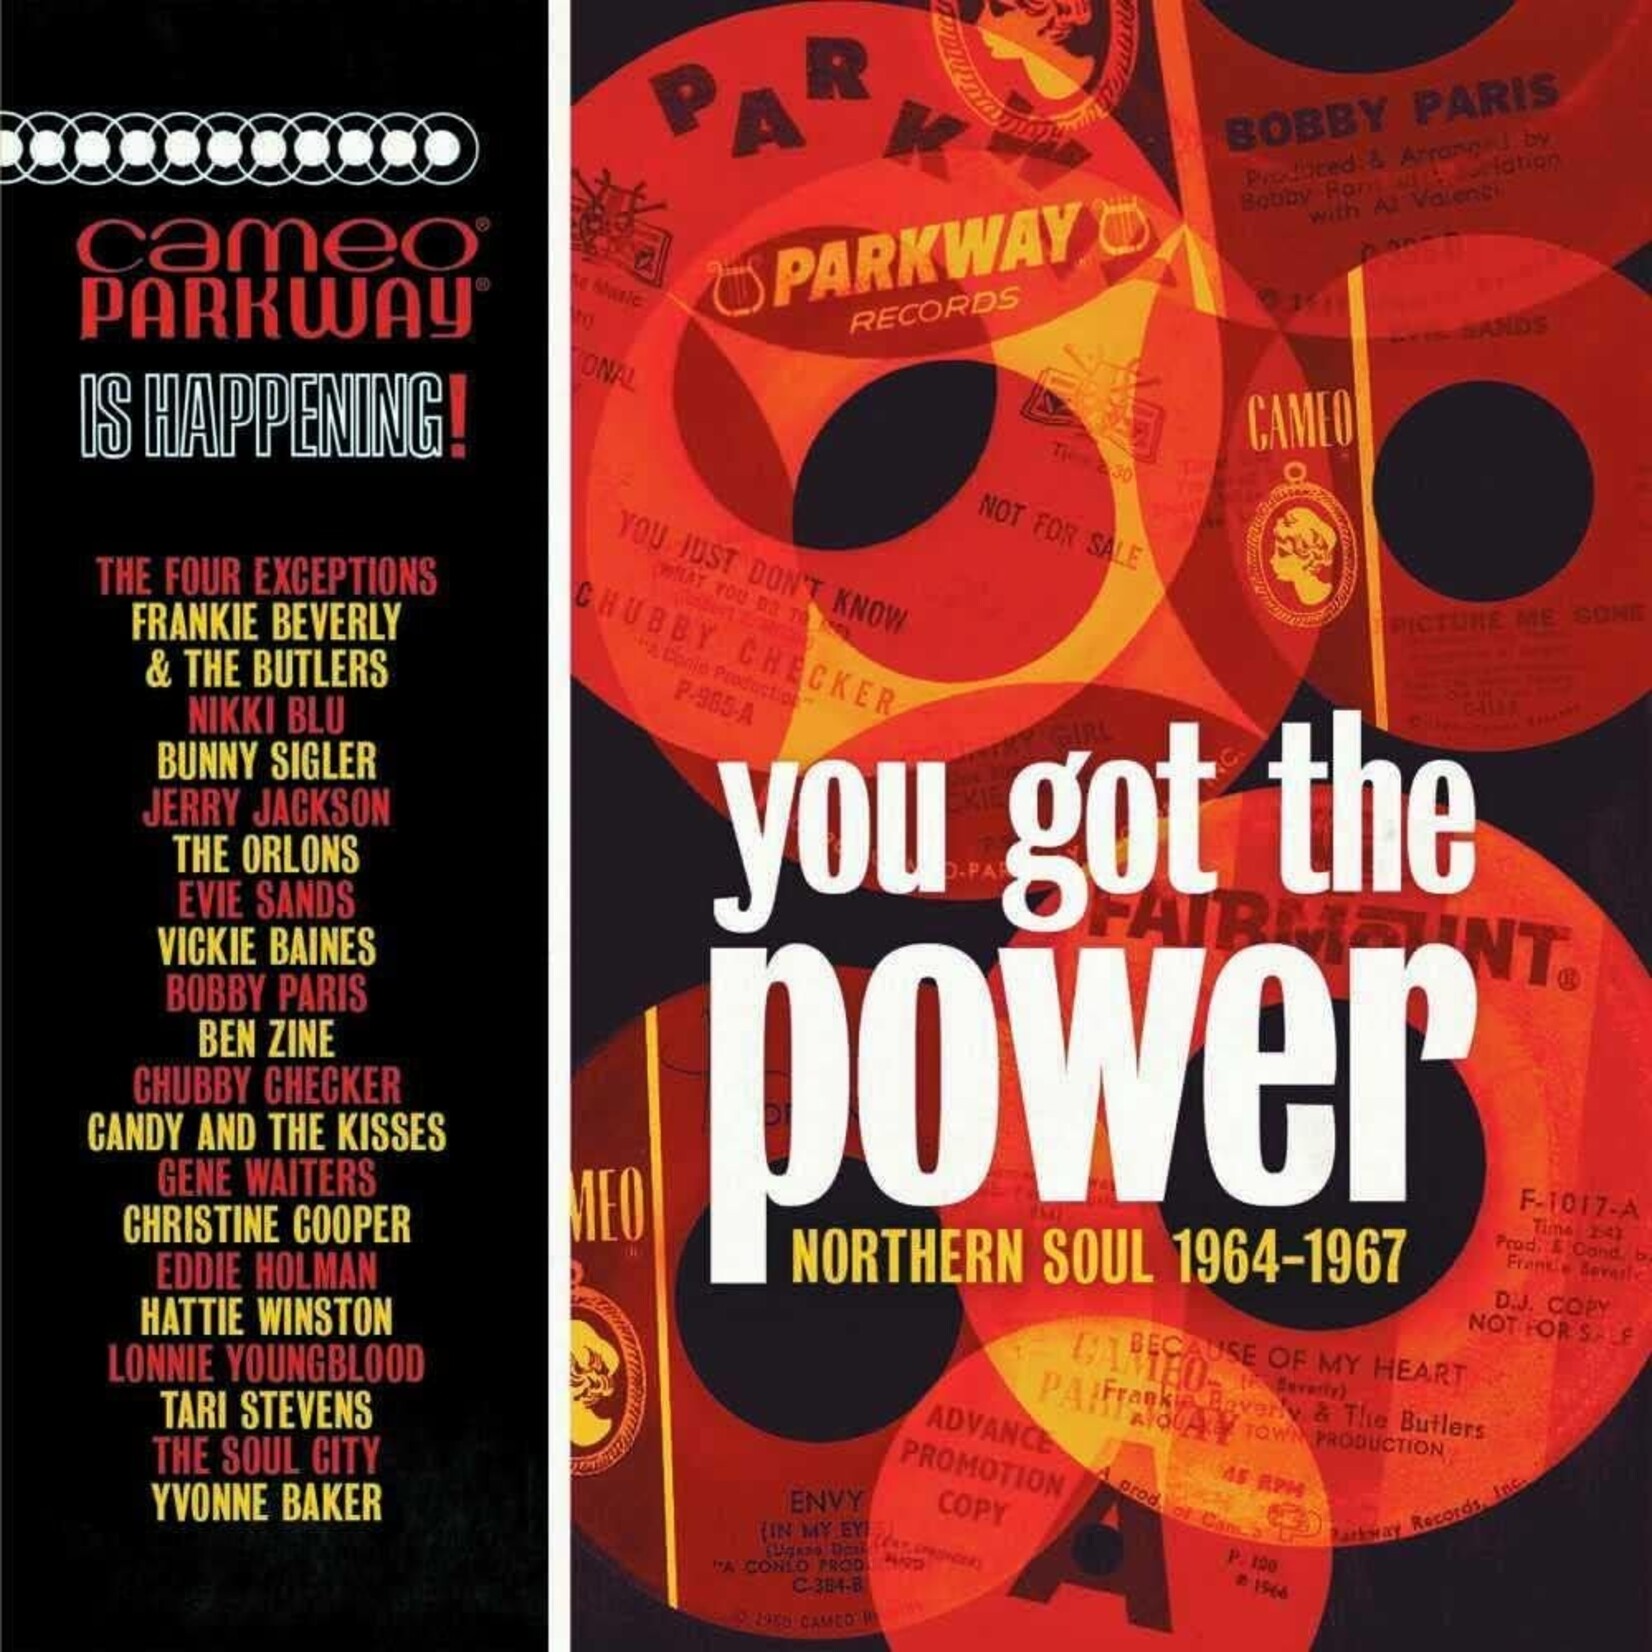 Various Artists - You Got The Power: Cameo Parkway Northern Soul 1964-1967 [CD]